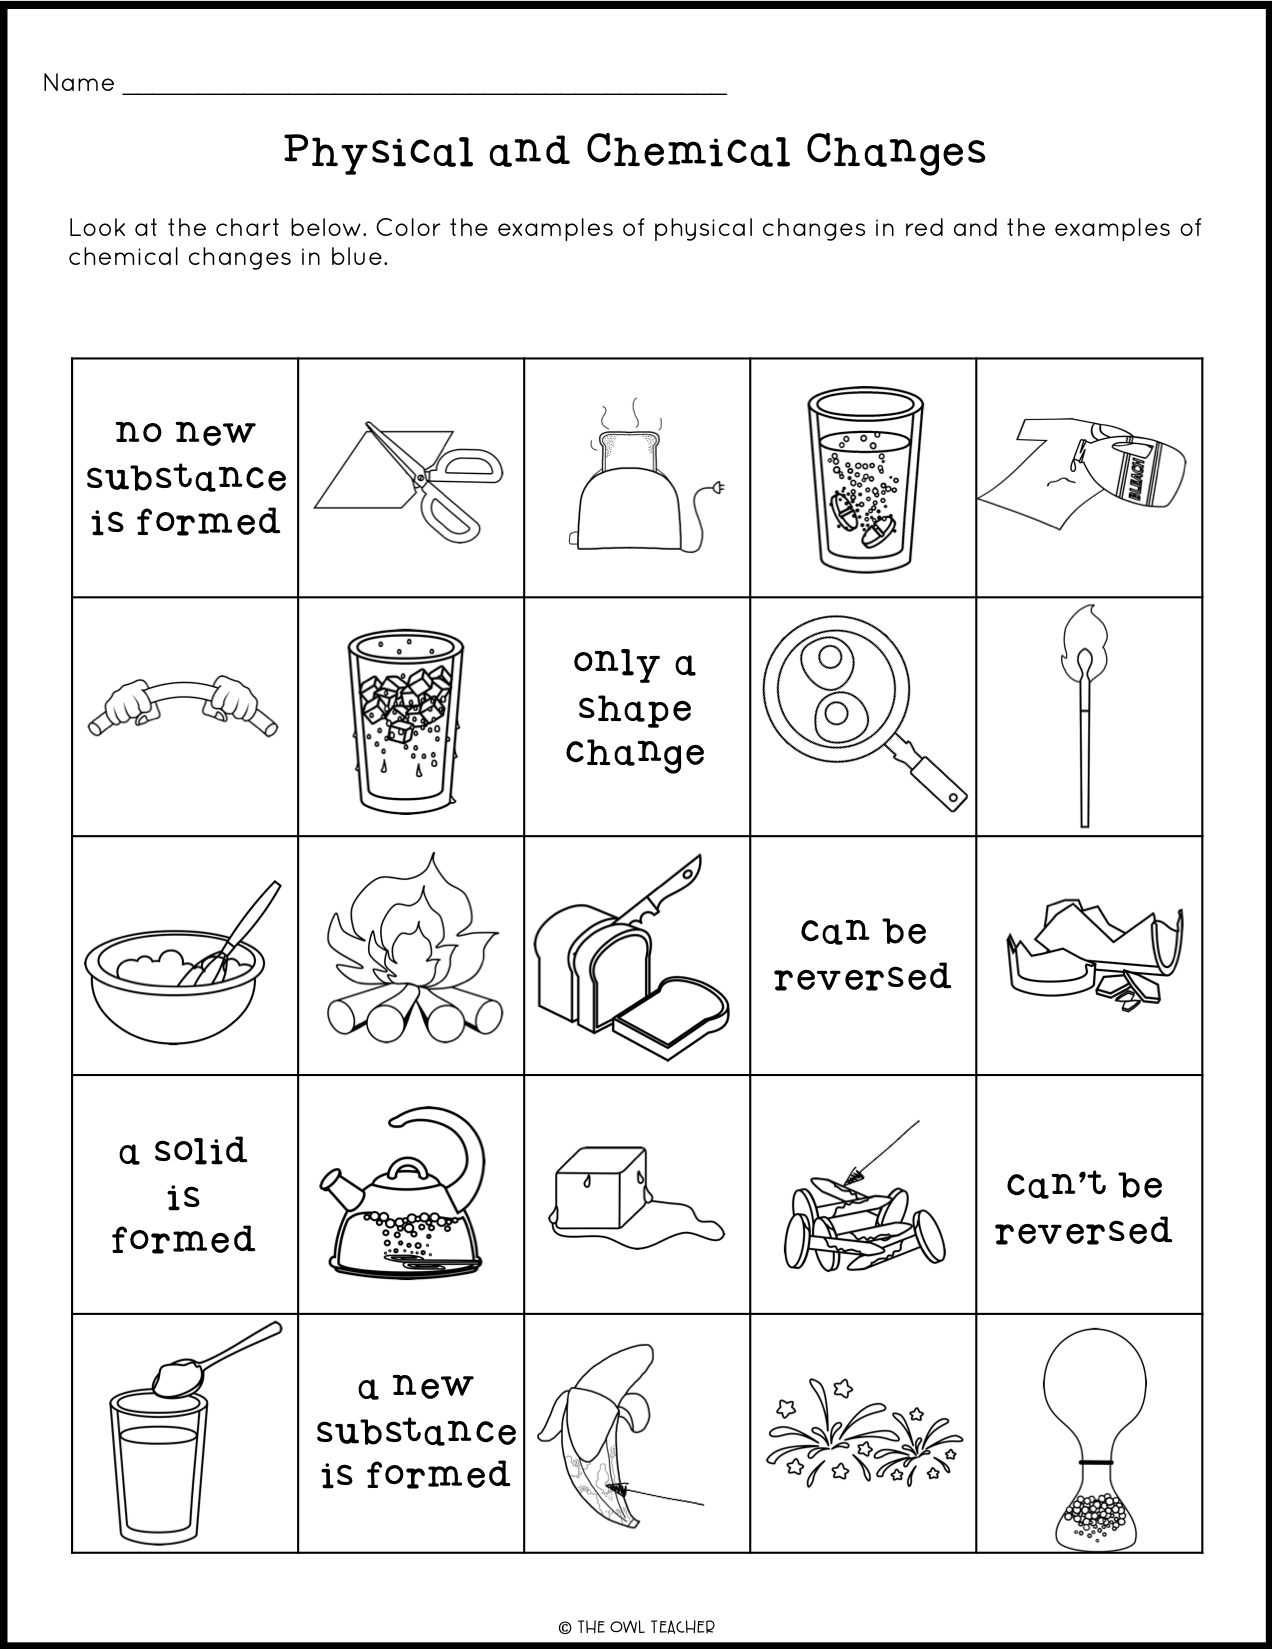 Physical and Chemical Changes Craftivity - The Owl Teacher With Regard To Physical Vs Chemical Changes Worksheet